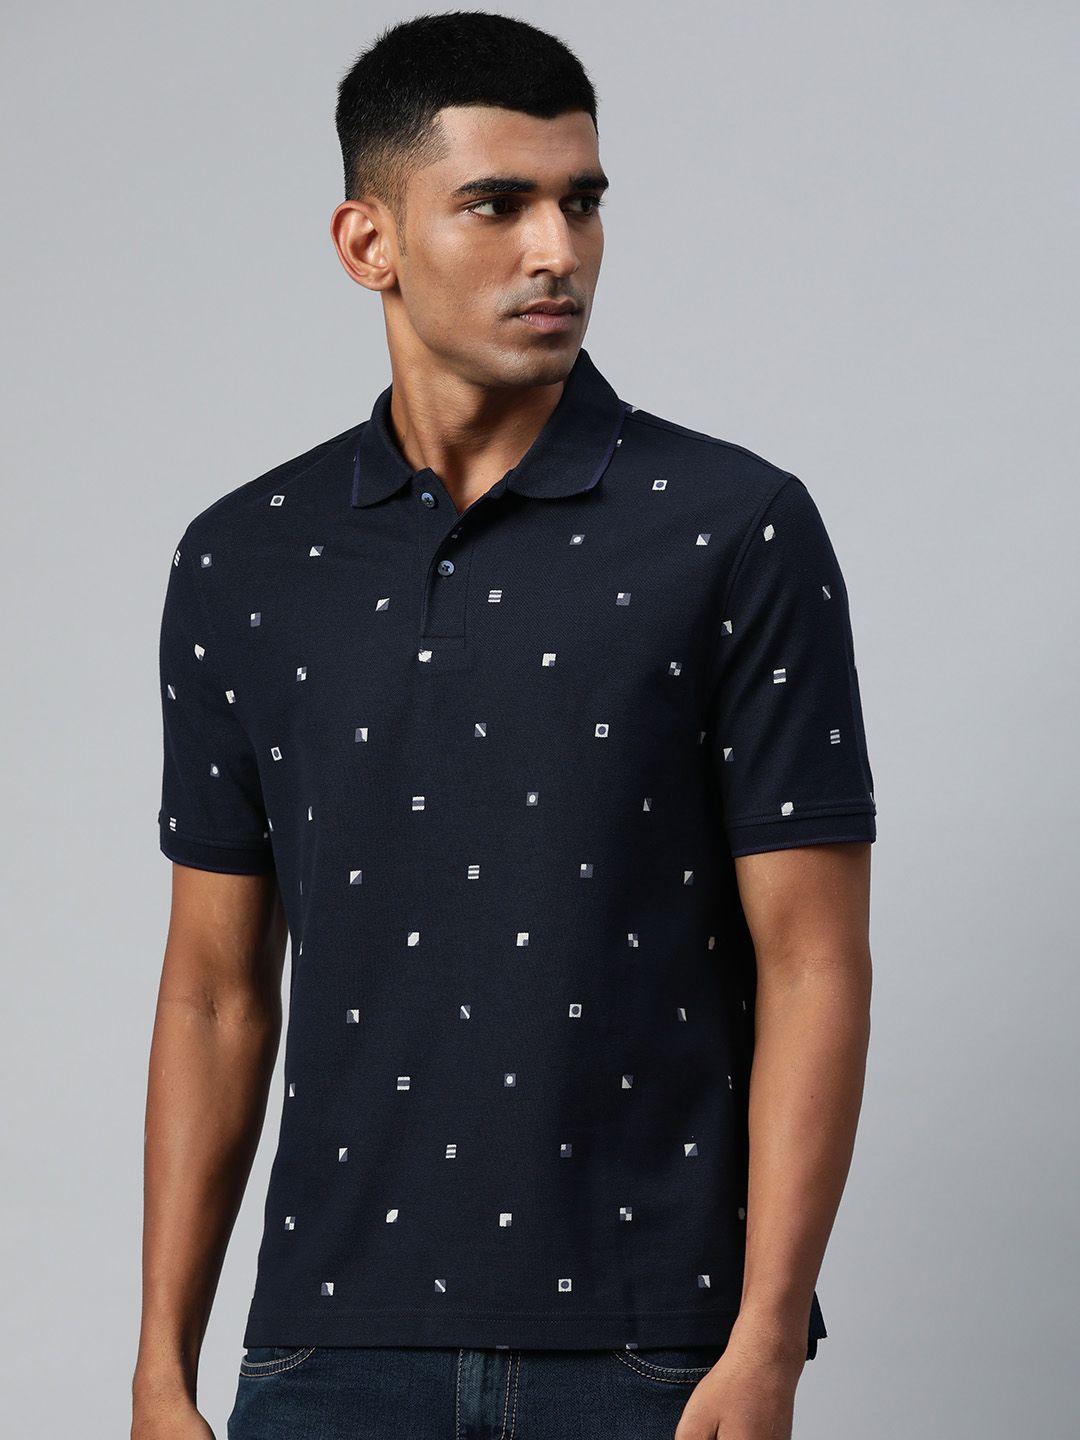 marks & spencer men navy blue pure cotton geometric printed polo collar t-shirt